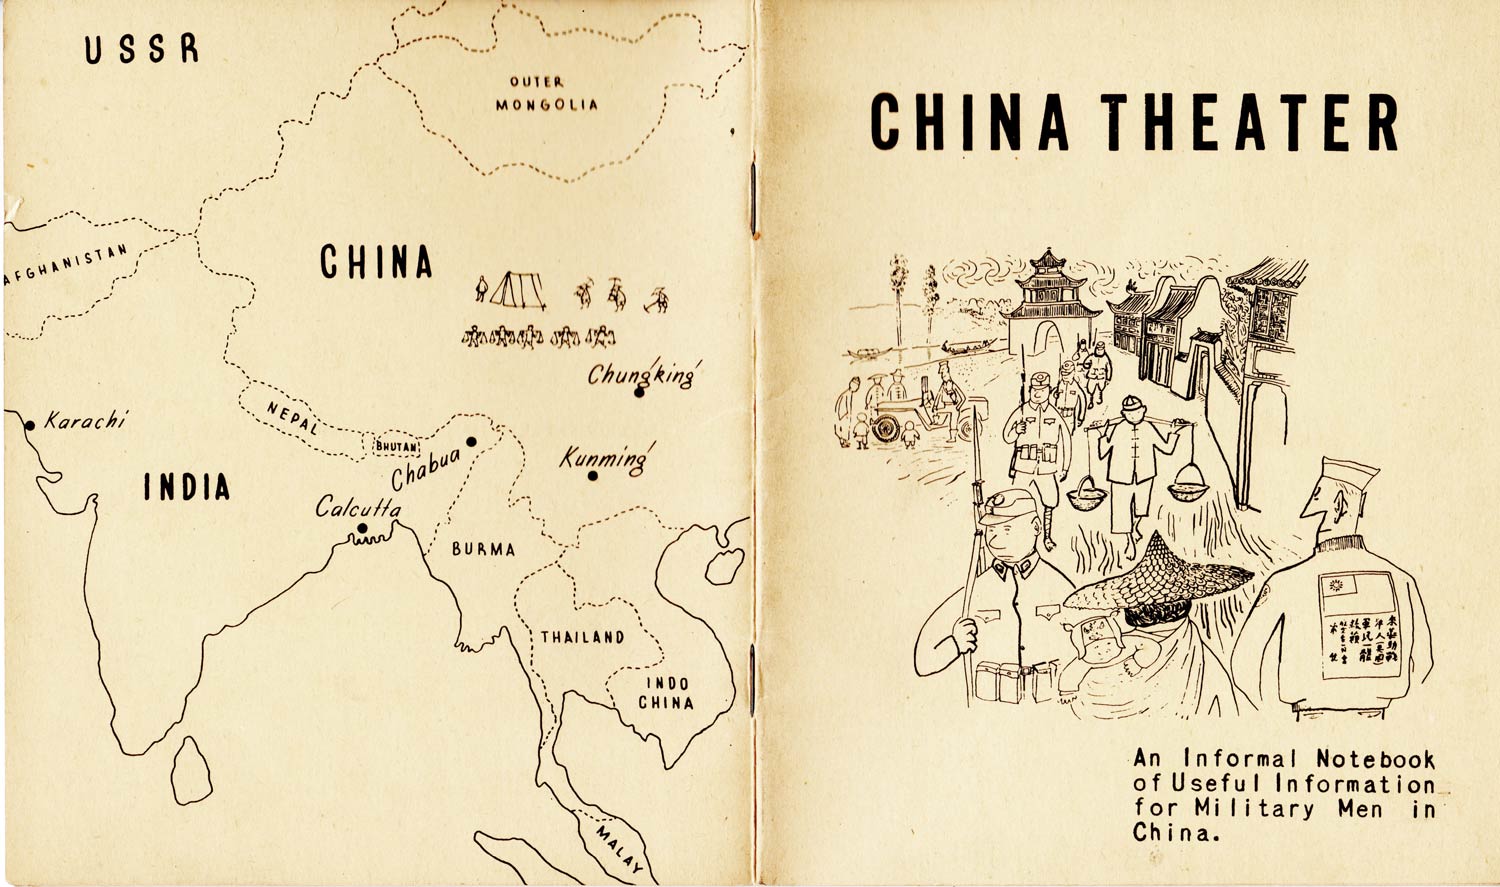 Cover of China Theater: An Informal Notebook of Useful Information for Military Men in China. Produced by the Reproduction Branch of the OSS, probably 1945. The Saul Steinberg Foundation.